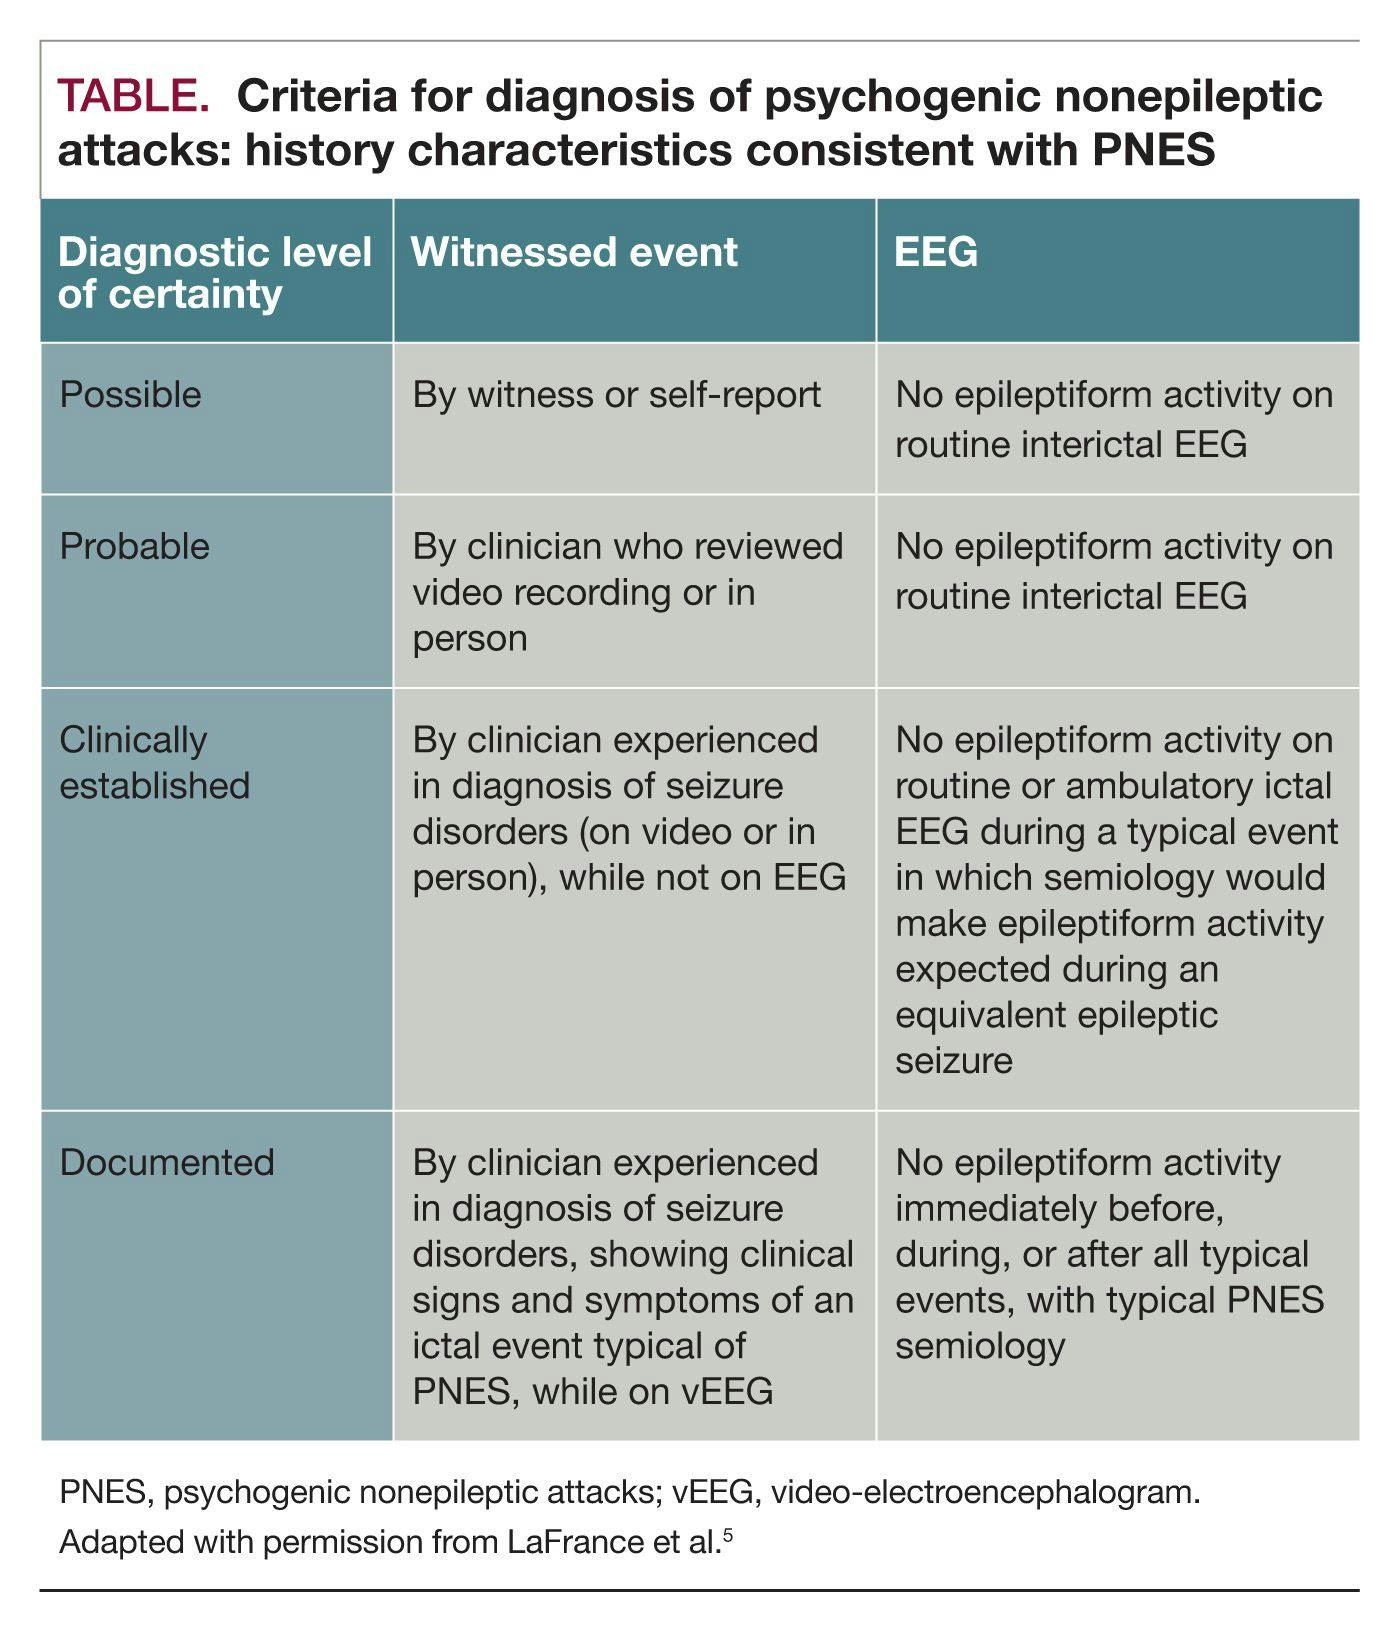 Criteria for diagnosis of psychogenic nonepileptic attacks: history characteristics consistent with PNES